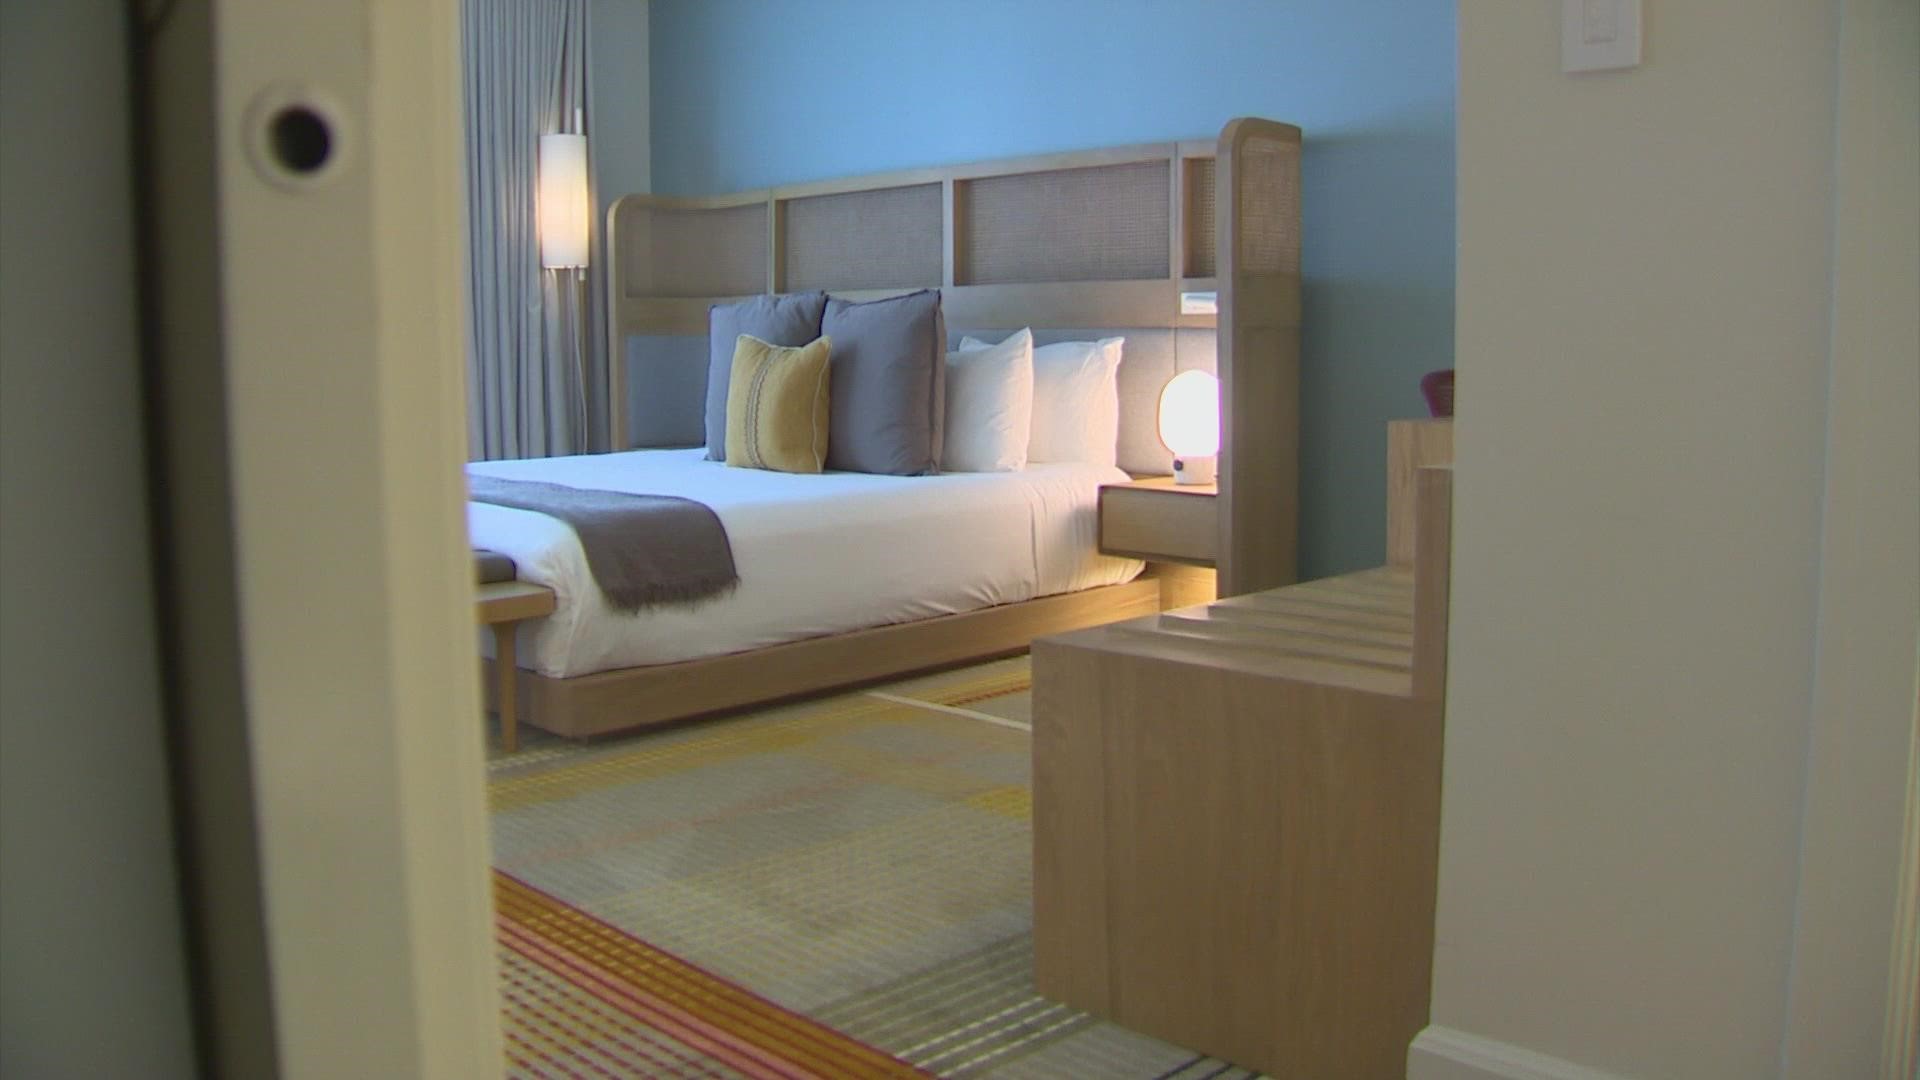 Demand for hotel rooms in Seattle reached 94% of 2019 levels in July and 96% in June.